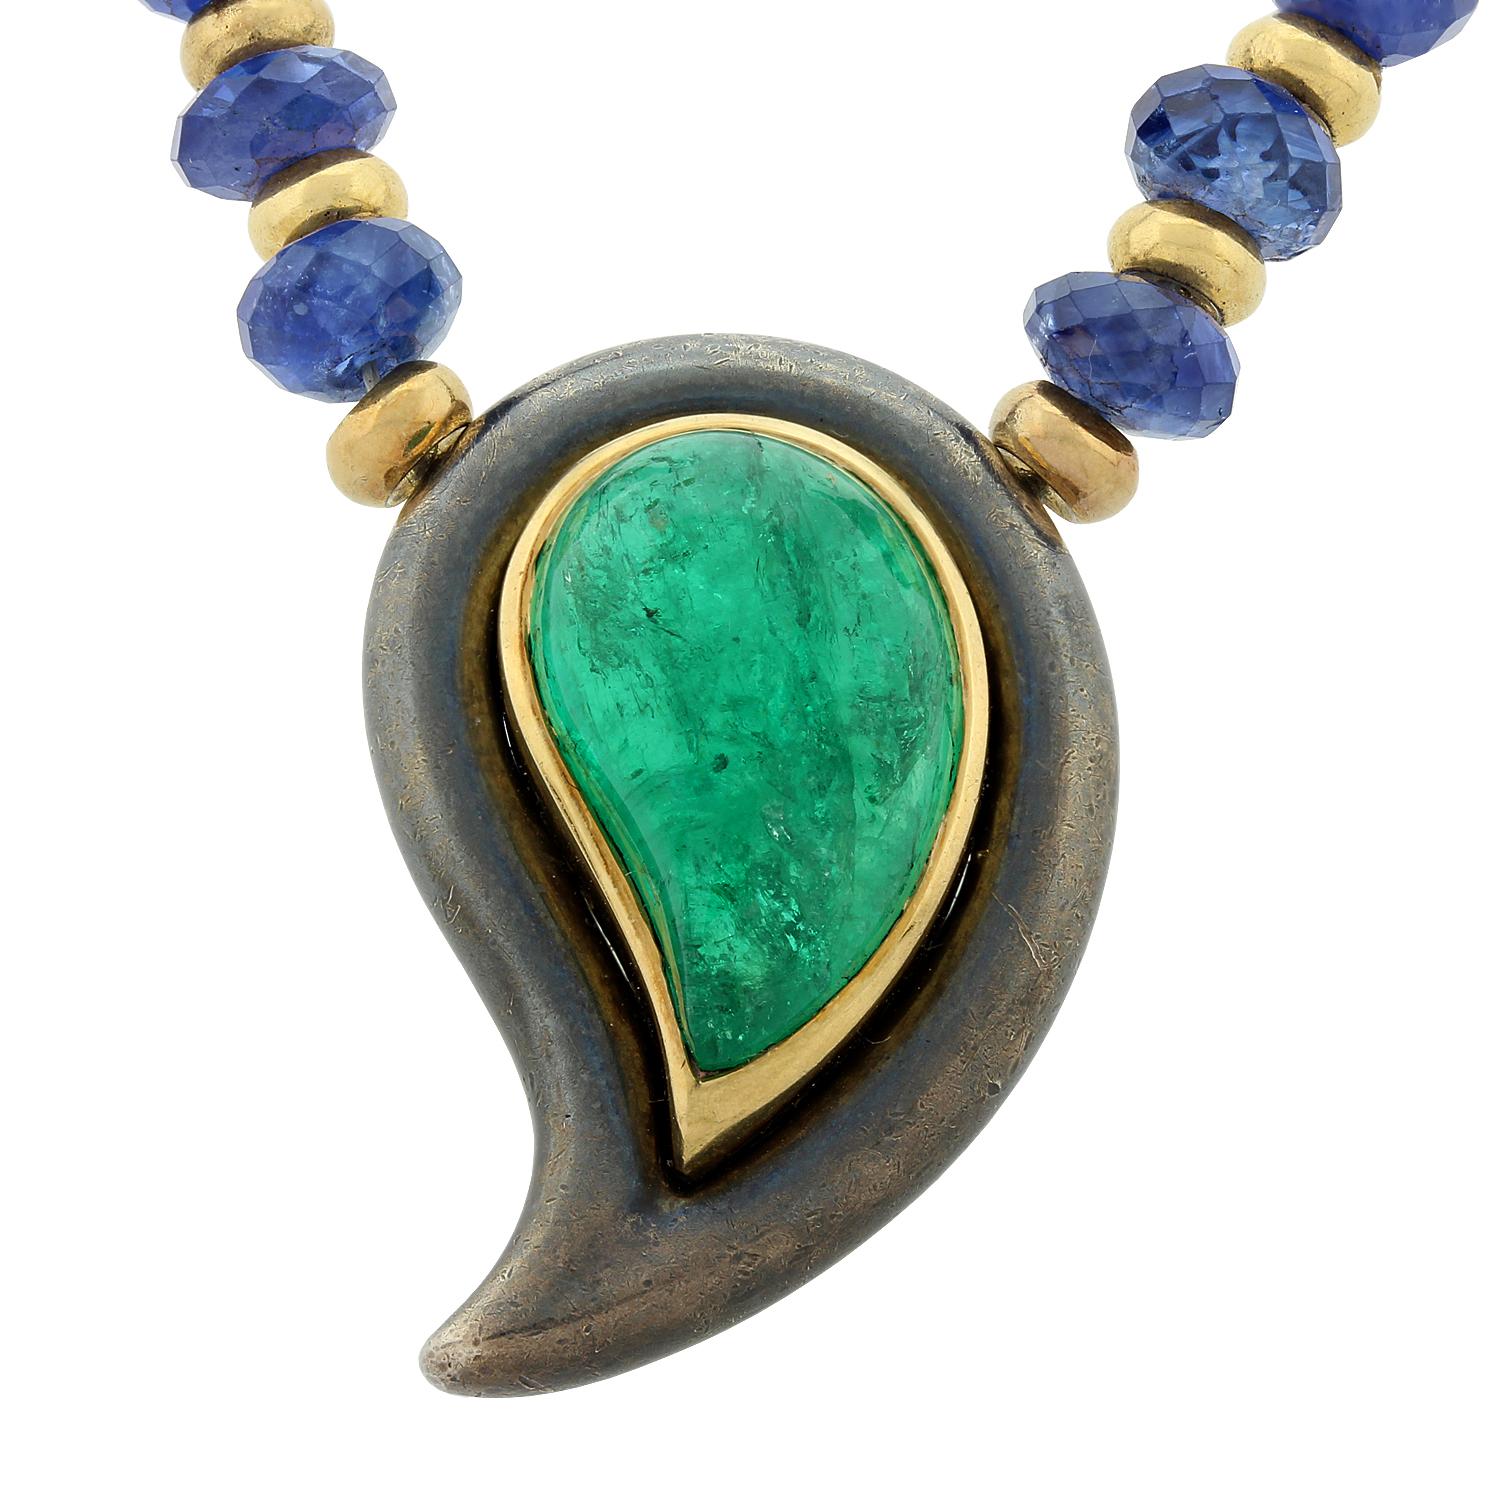 A wonderfully unique necklace by the French jewelry makers Poiray. It features a superb gem cabochon emerald with fine vivid green color. 
Gem quality faceted sapphire beads run along the entire necklace strand with gold accents. Made in 18K yellow